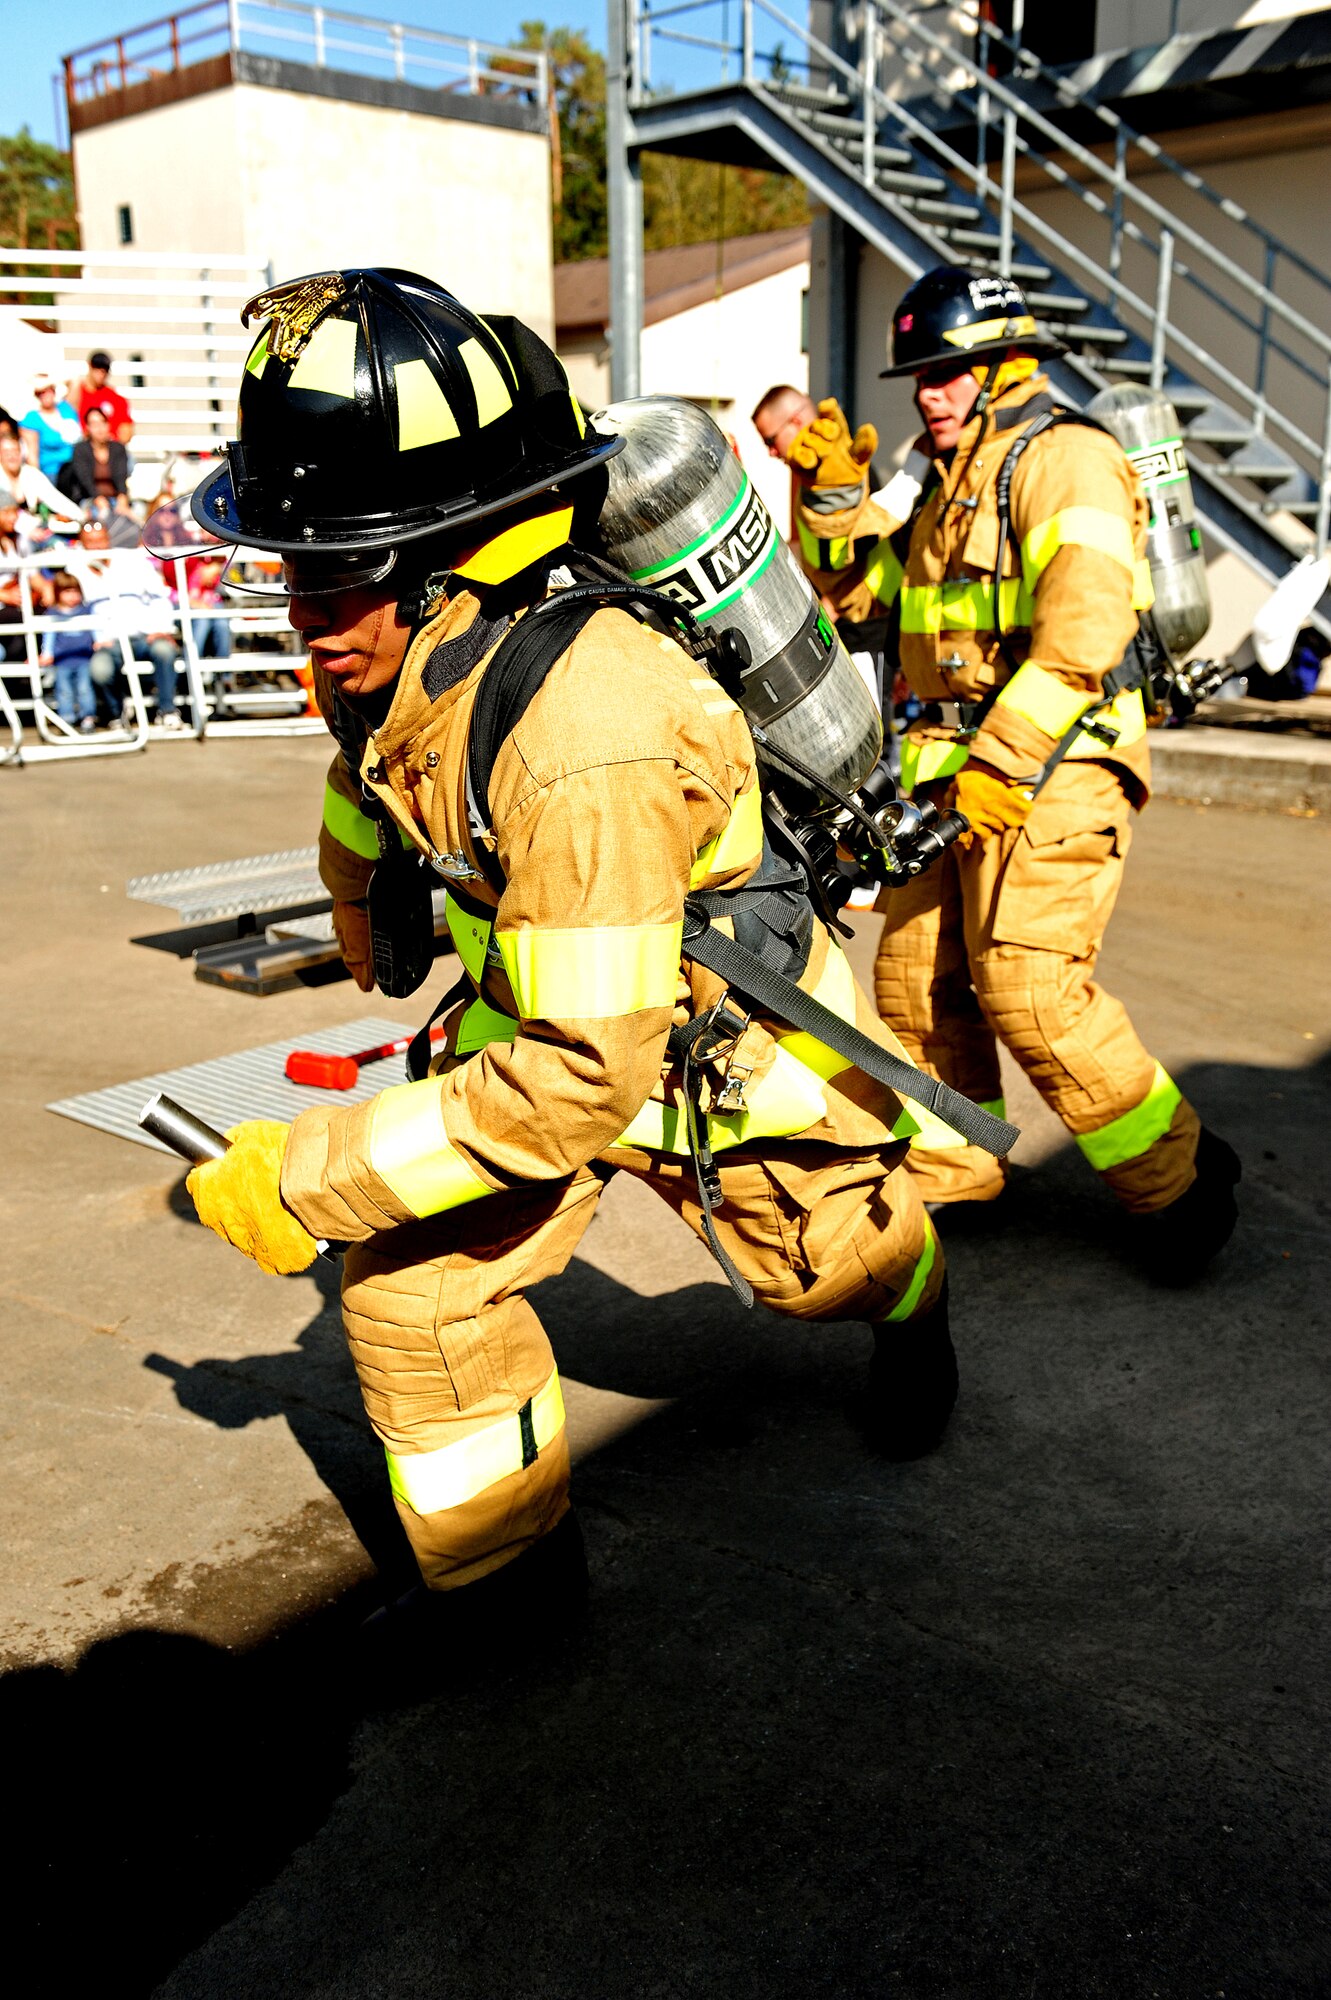 U.S. Air Forces in Europe firefighters participate in a Firefighter Combat Challenge relay race at the 435th Construction and Training Squadron contingency training site, Ramstein Air Base, Germany, Oct. 9, 2010. The competition consisted of a timed, five part obstacle course simulating real life challenges. (U.S. Air Force photo by Airman 1st Class Brea Miller)